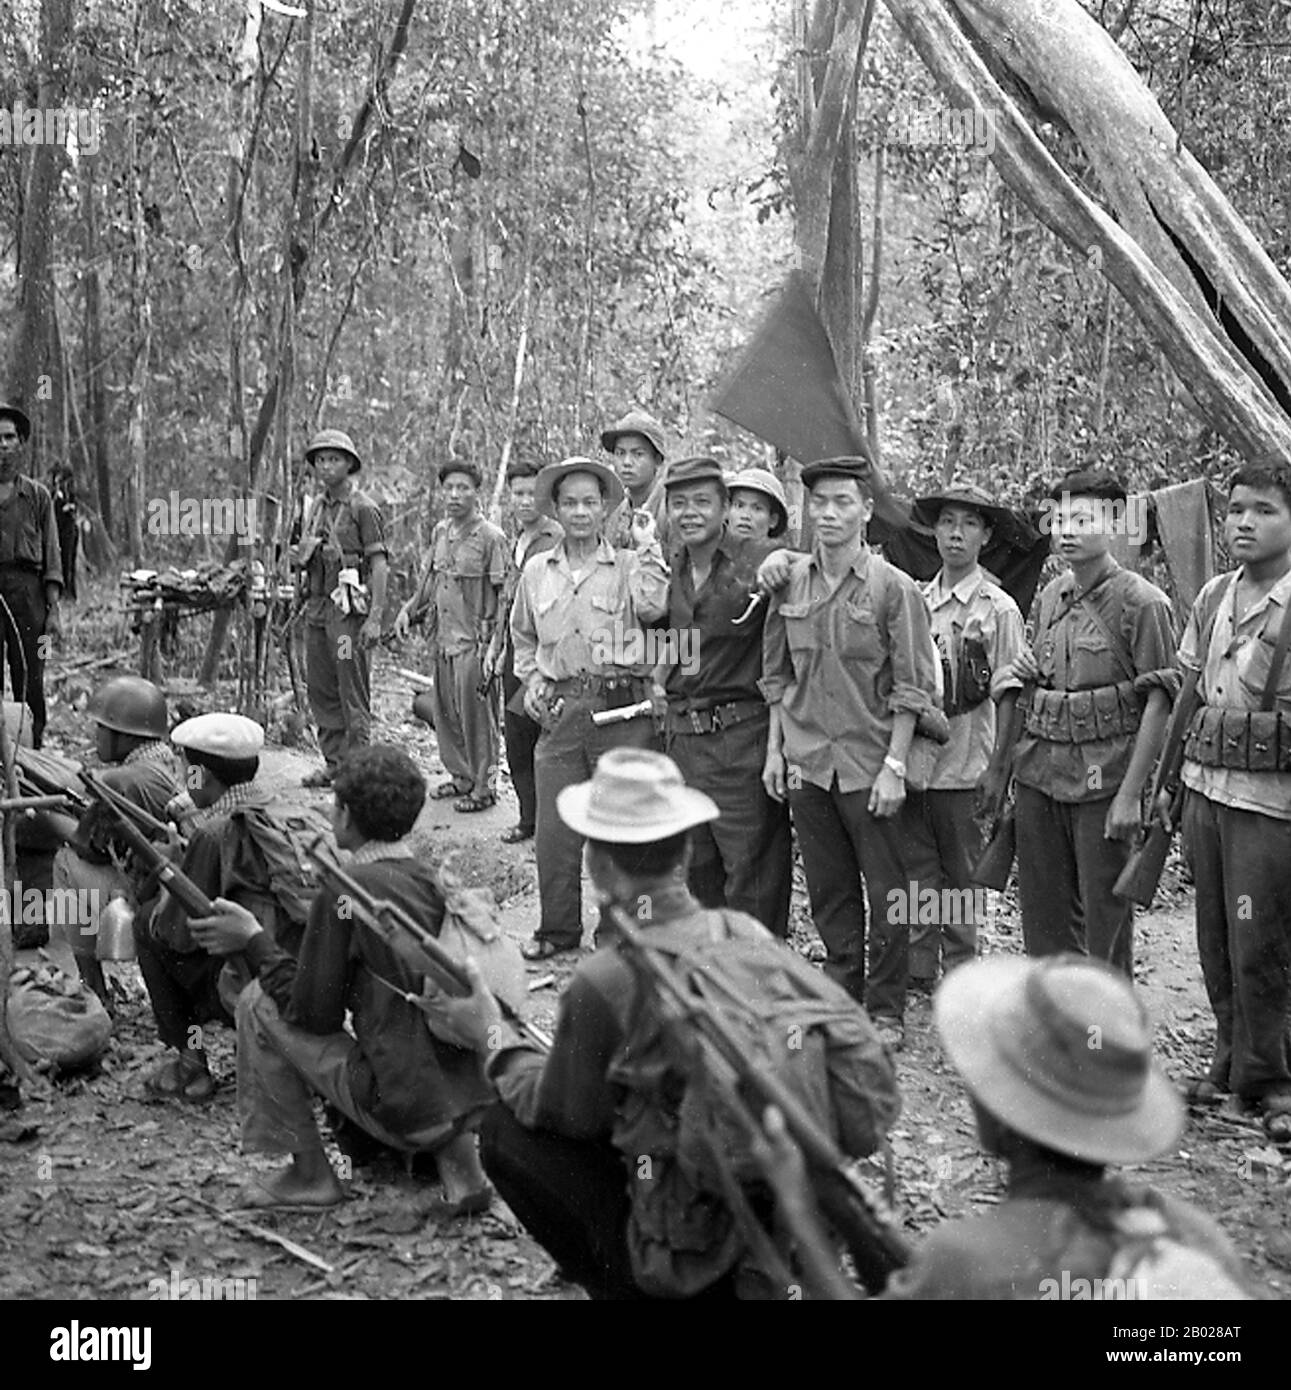 Like Mok, So Phim won his spurs as an Issarak guerrilla chief, fighting the French in the late 1940s. He was born into a peasant family in Eastern Cambodia, sometime in the 1920s (the year 1925 is often cited, but is no more than a guess). In August 1951, he became one of five founding members of the Vietnamese-inspired PRPK. Three years later, after the Geneva peace accords ended the first Indochina war, he was named to the four-member provisional committee which headed the party.   In 1960, Phim was elected an alternate member of the new CPK Standing Committee, and, three years later, a full Stock Photo